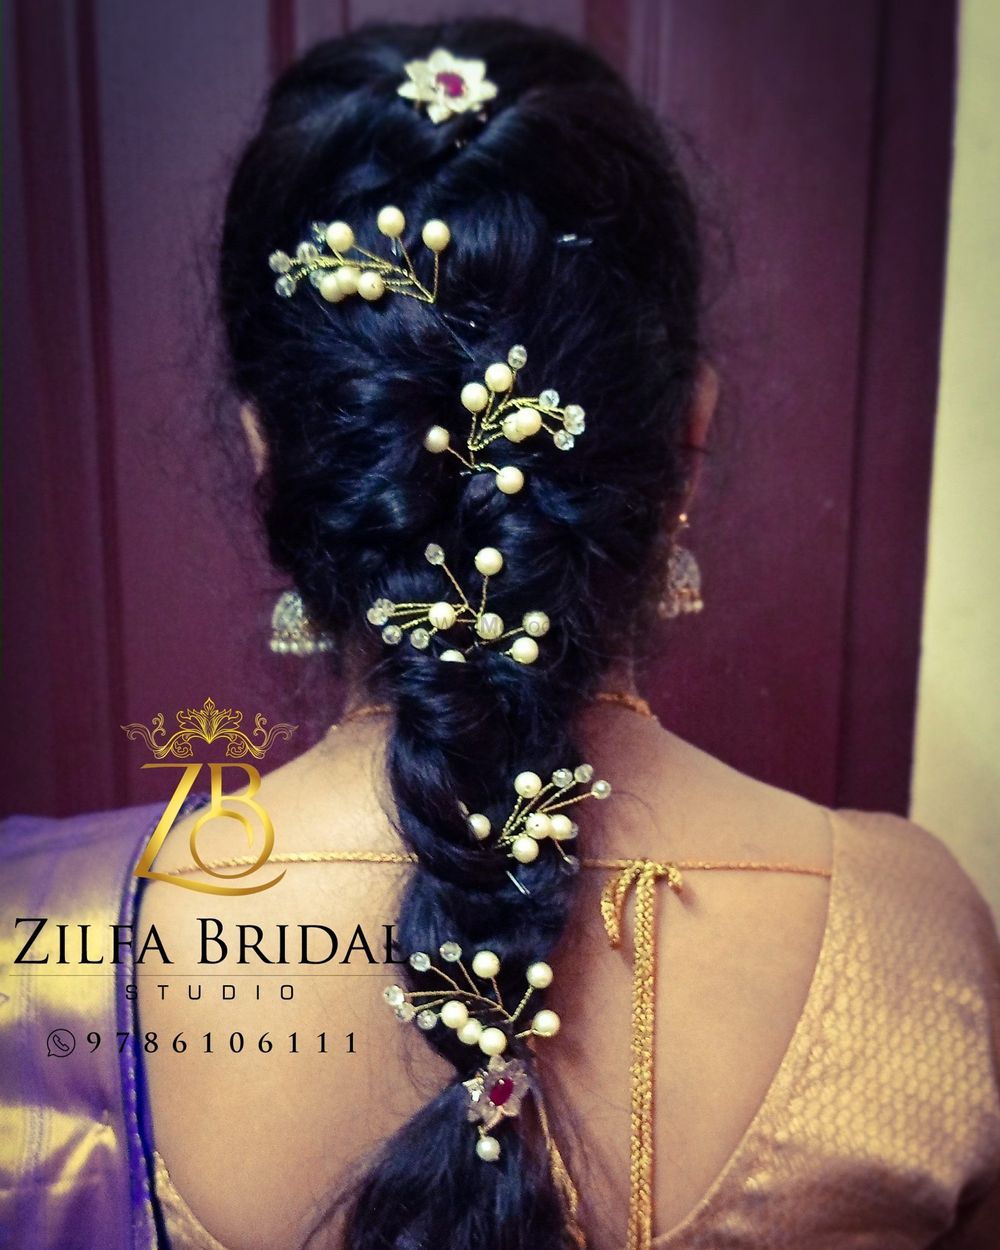 Photo From Hairstyle 's of Zilfa - By Zilfa Bridal Studio